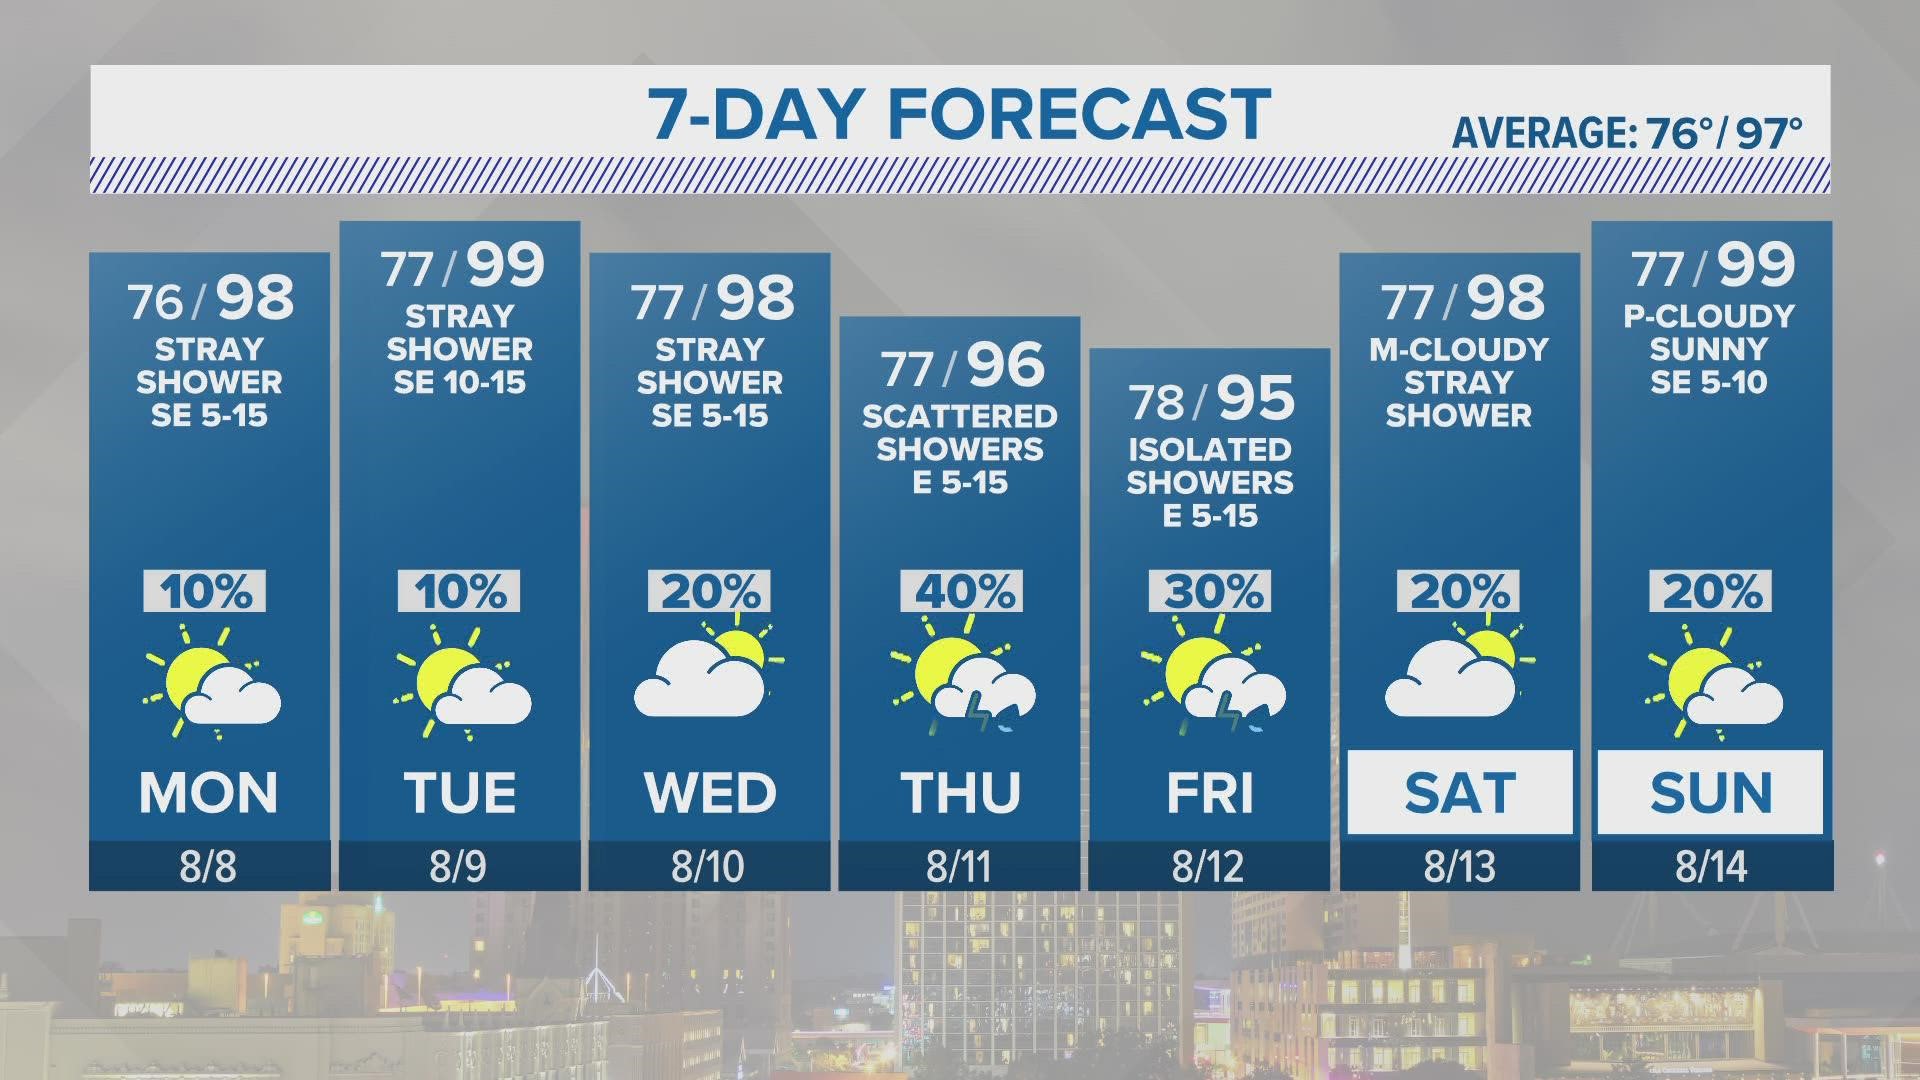 The weather pattern will be rinse and repeat through Tuesday. A mix of clouds and sunshine, spotty showers in the afternoon, and highs in the upper-90s.